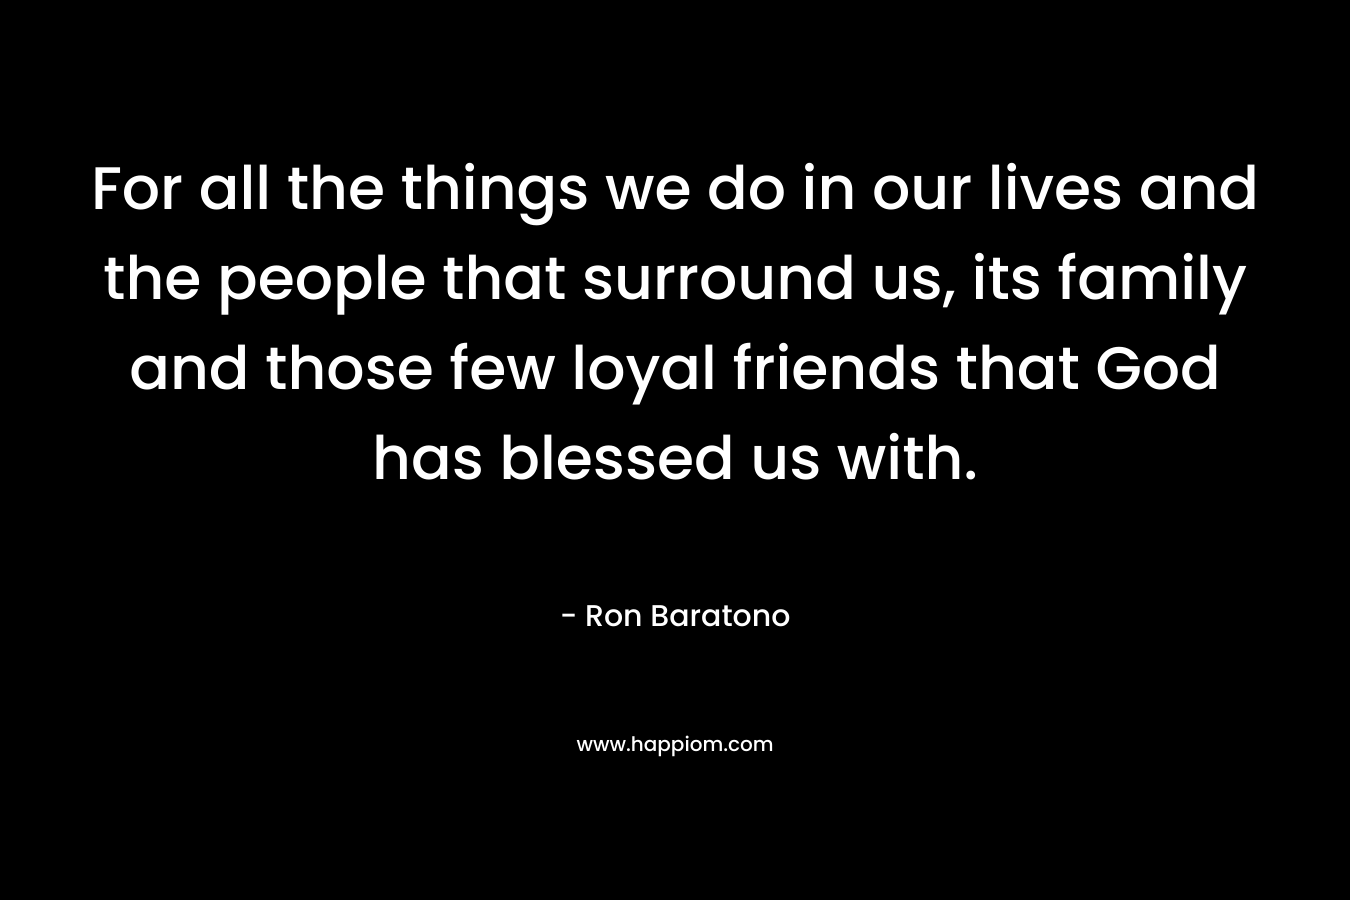 For all the things we do in our lives and the people that surround us, its family and those few loyal friends that God has blessed us with. – Ron Baratono